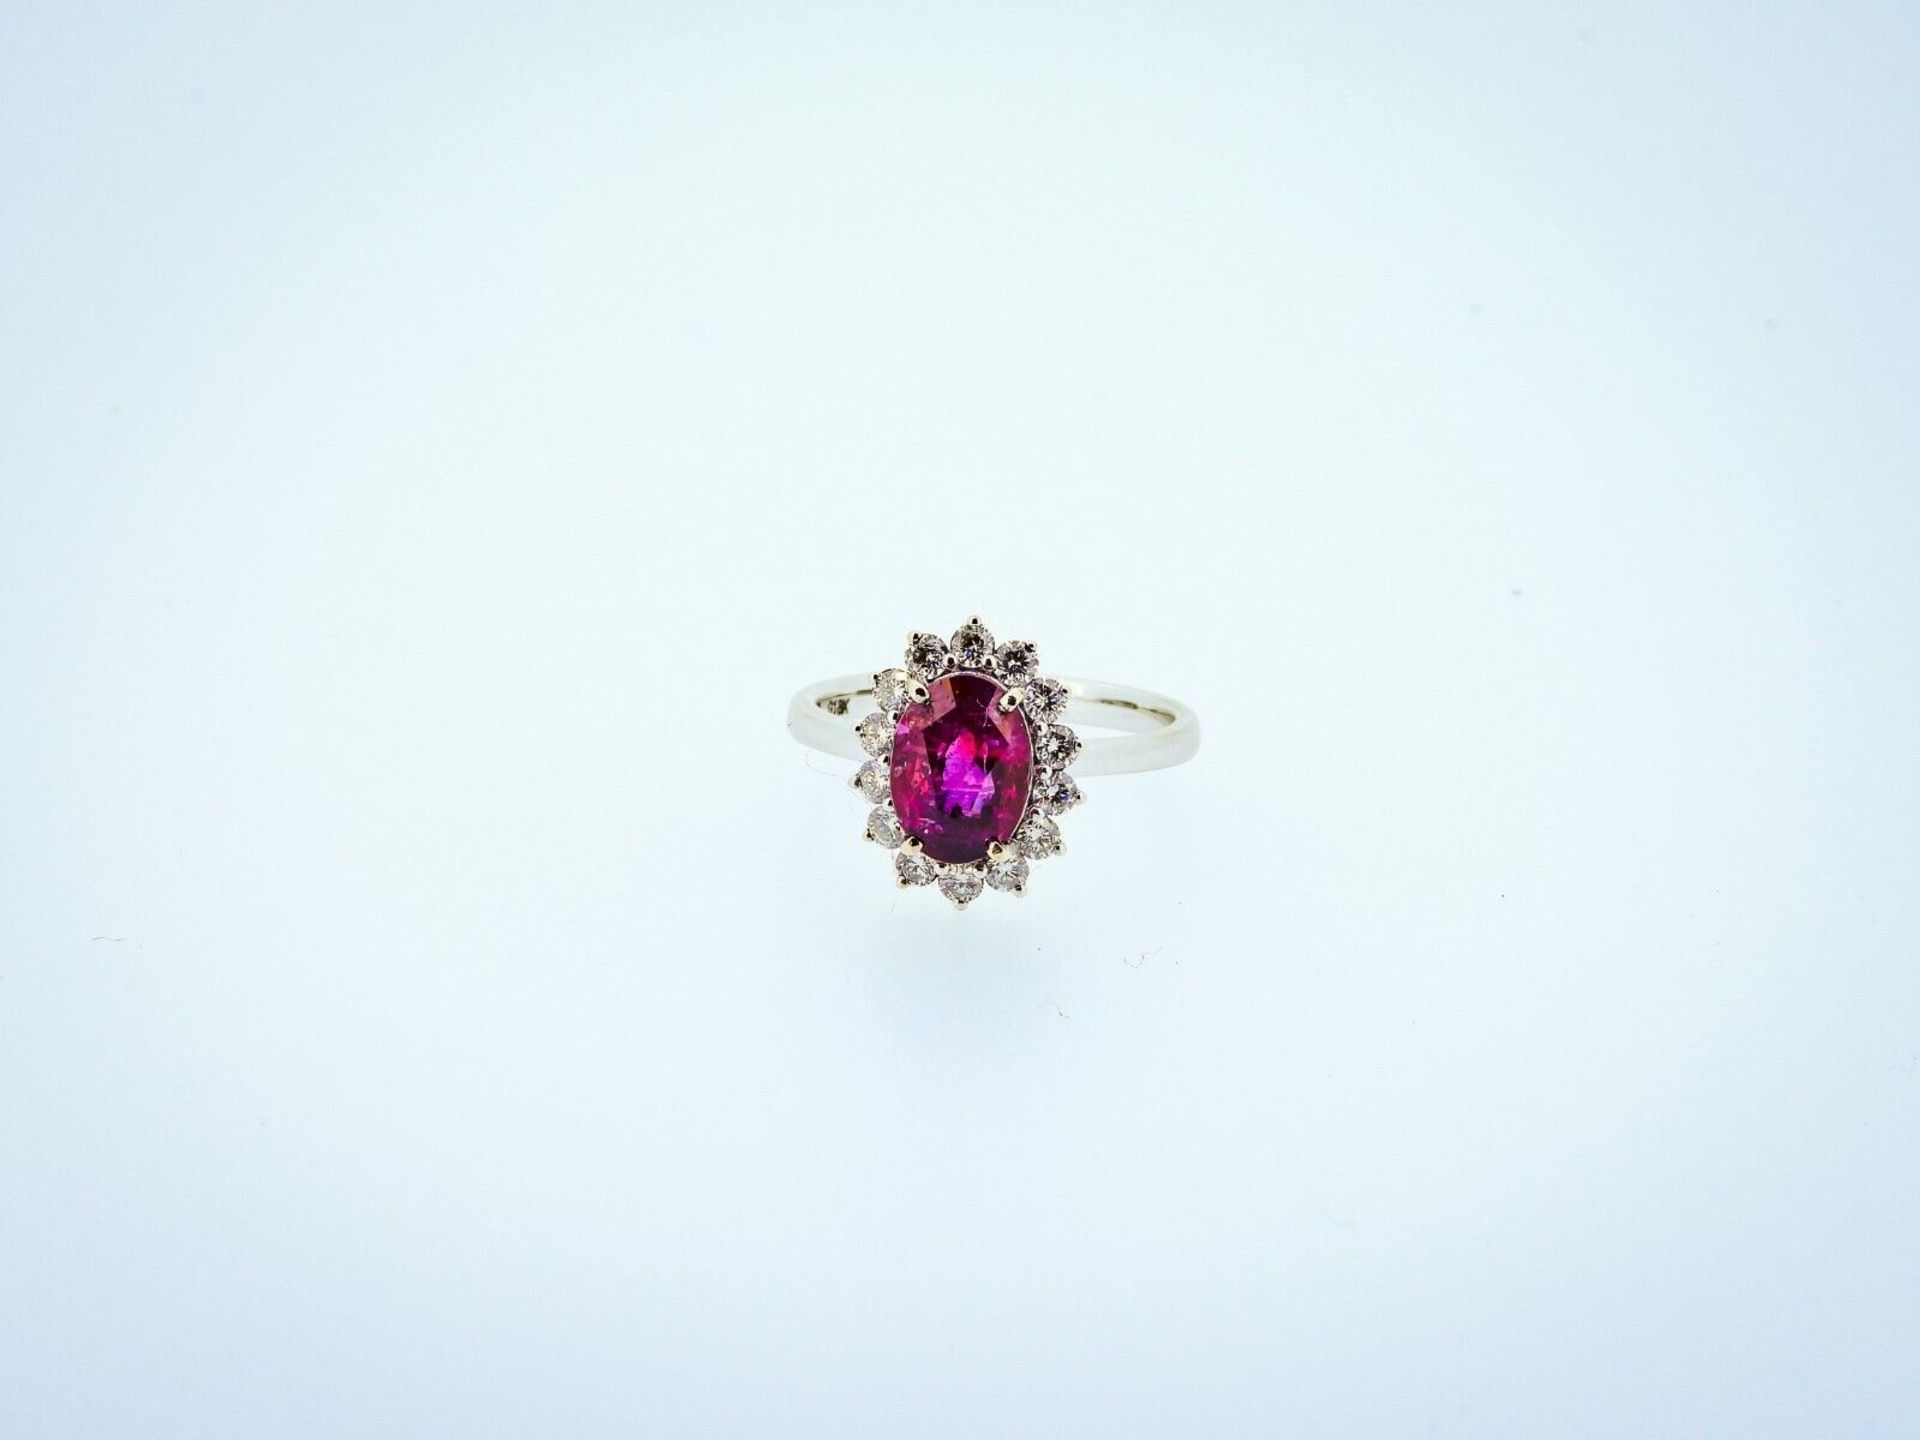 Certified 3.33 ct Vivid Pink Clean VS Untreated Sapphire & Diamonds Ring - Image 5 of 7